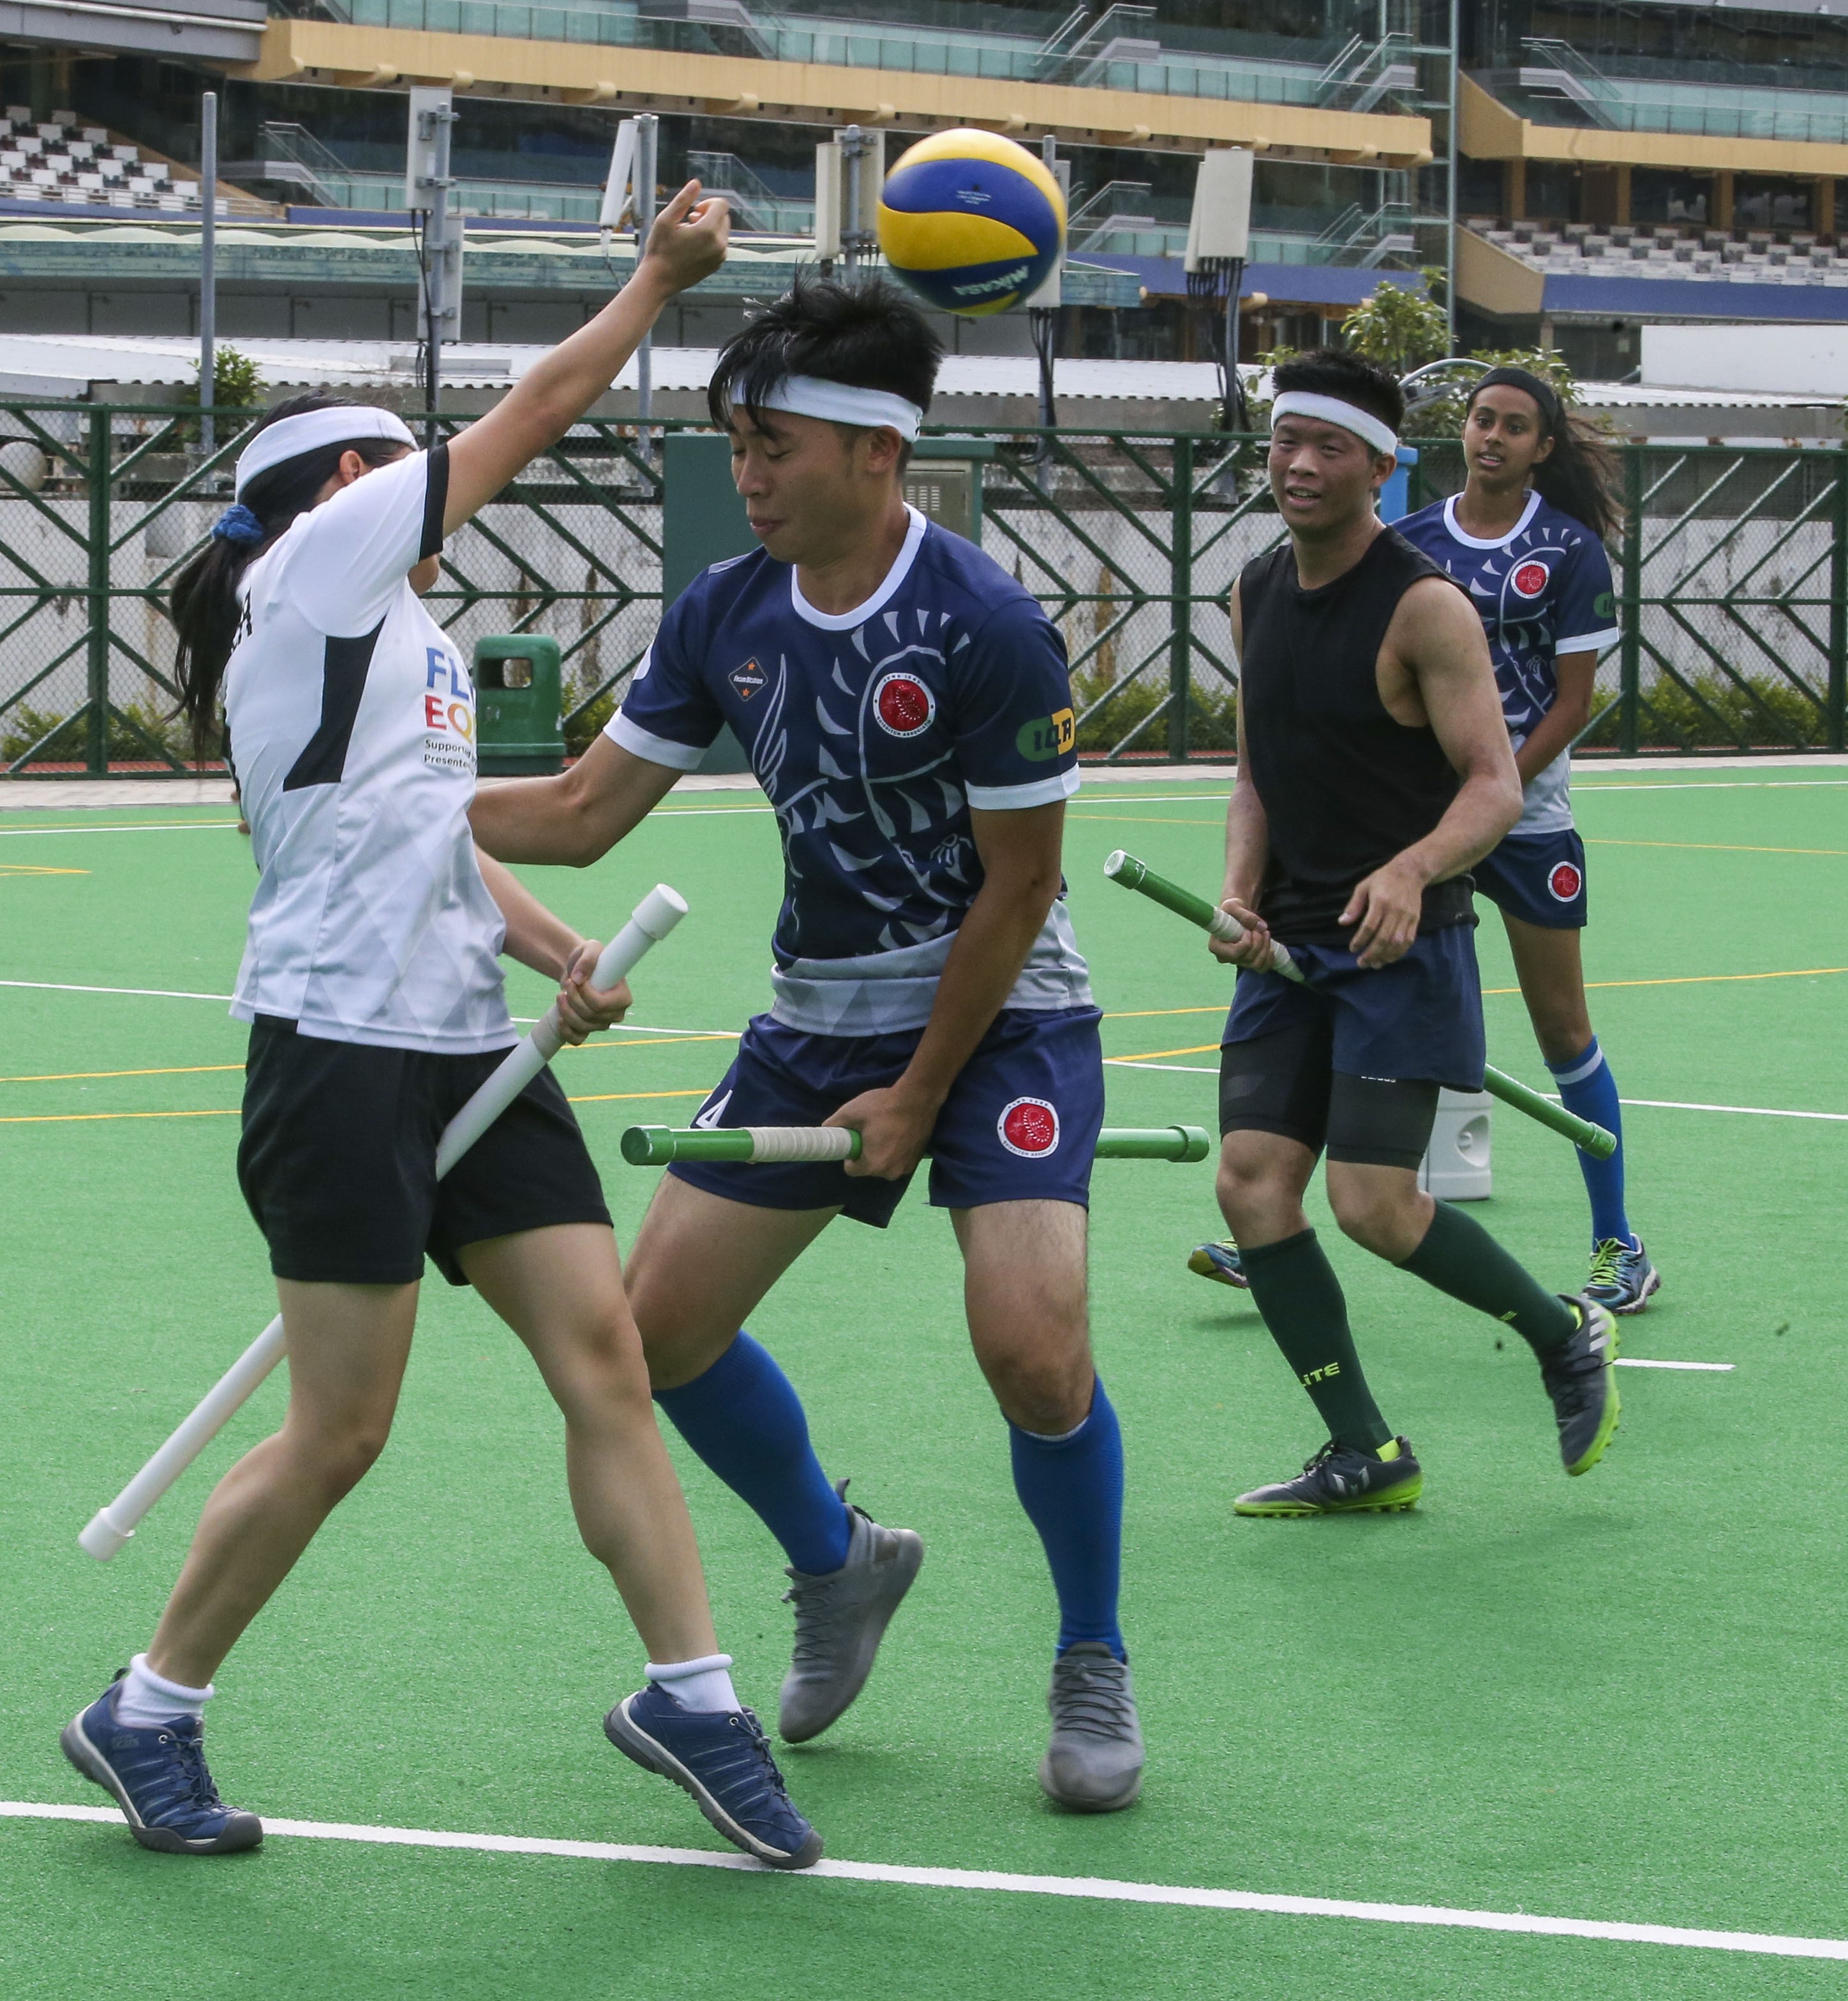 University of Hong Kong Quidditch Club enact an earthbound version of the Hogwarts game as chasers dash between hoops, broomsticks between their legs, in a sport that combines rugby, dodgeball, tag and J.K Rowling rules